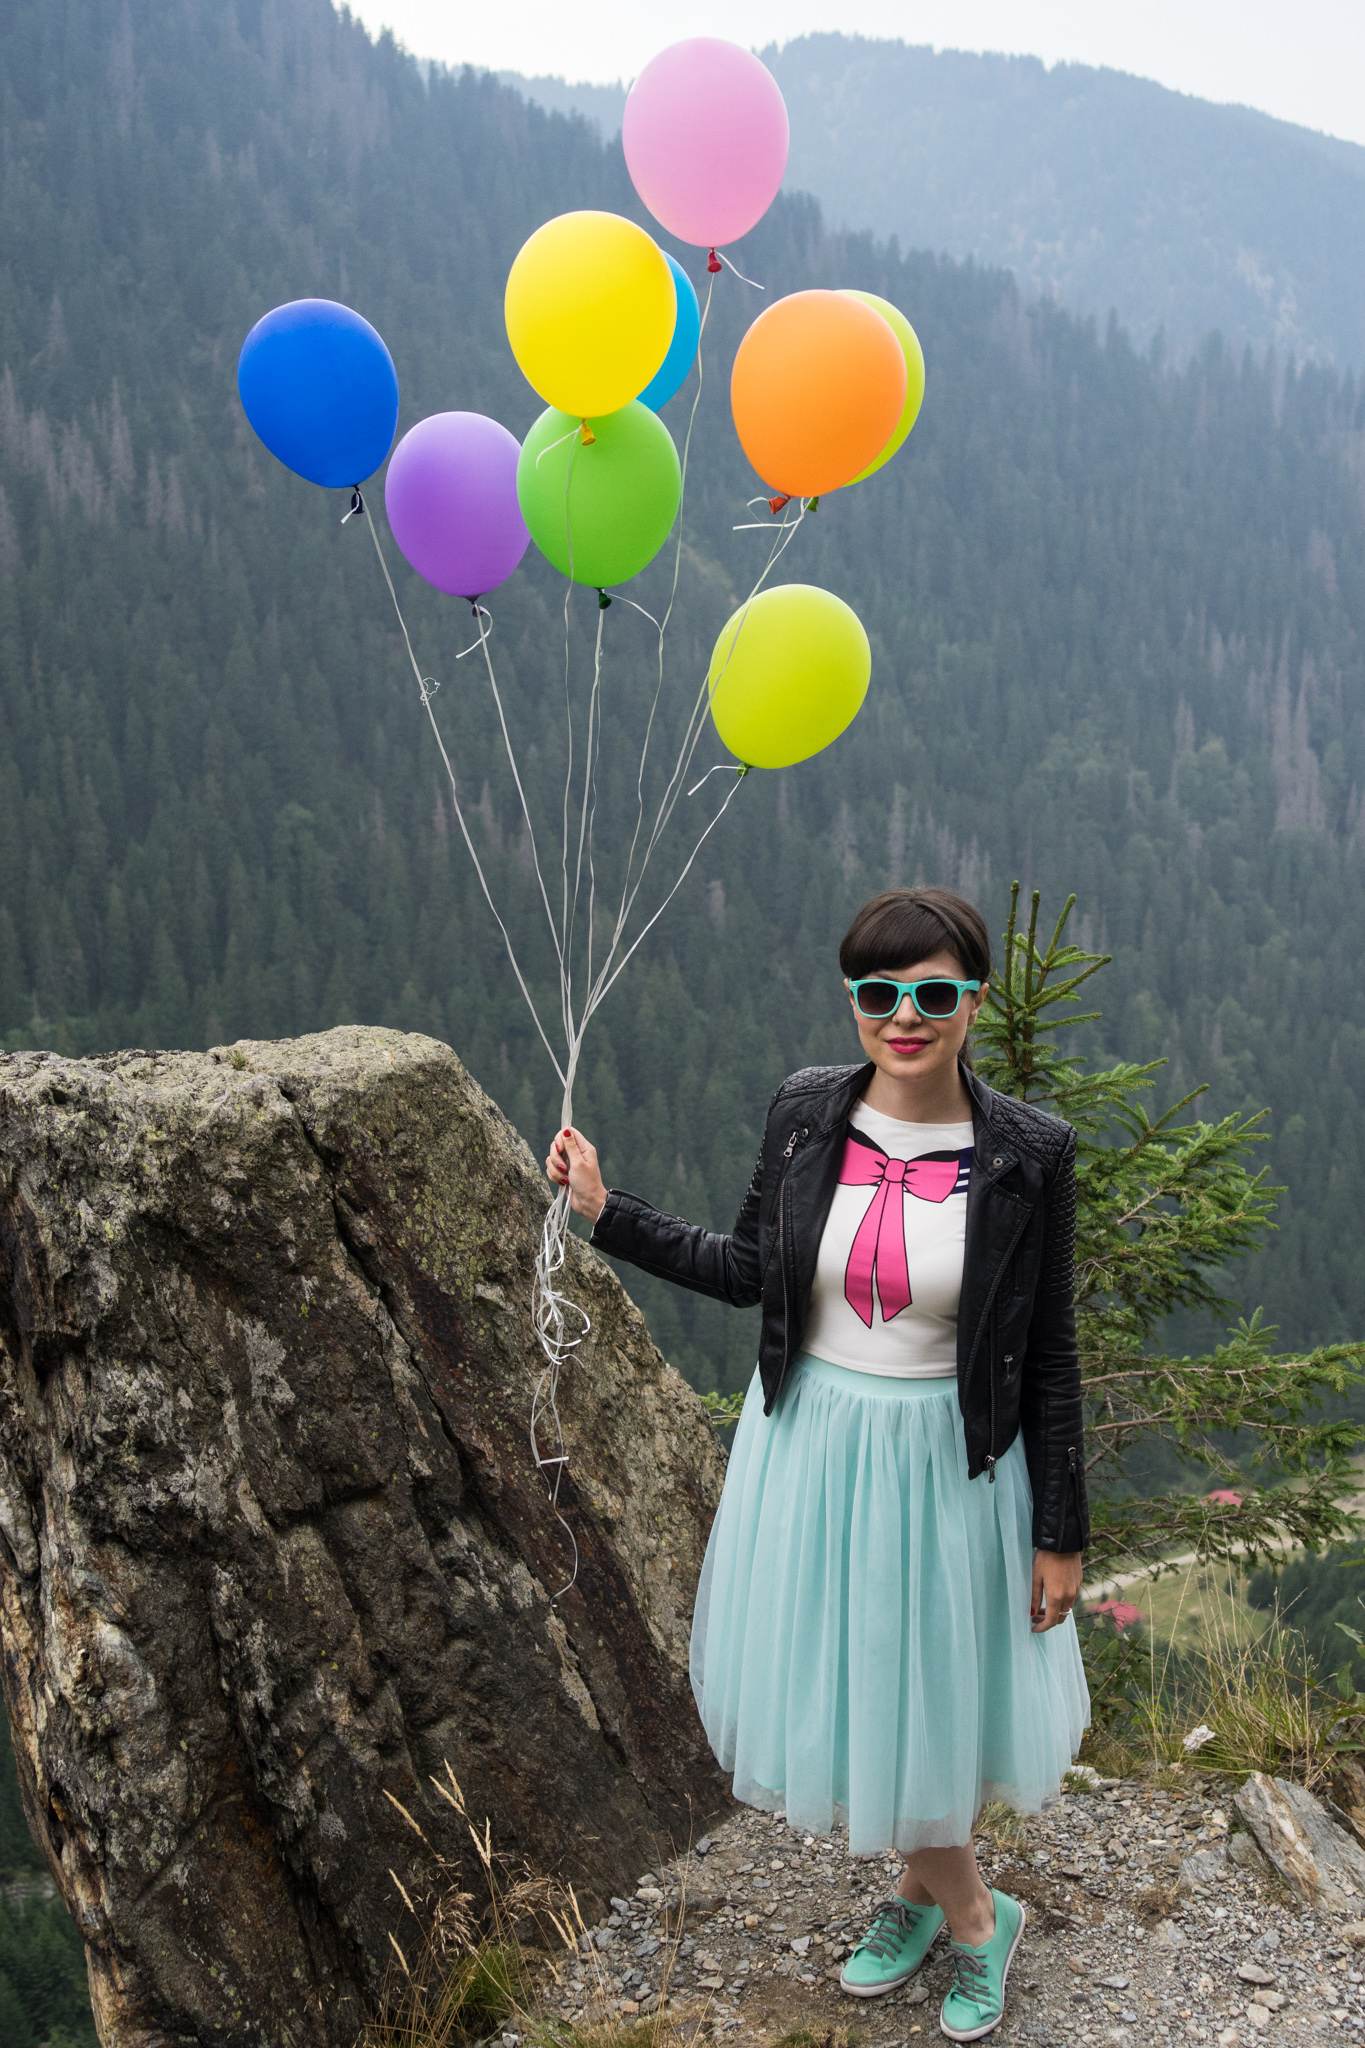 special 30th birthday photo shoot - tutu, bows and colorful balloons koton mint tulle skirt mint sneakers h&m crop top pink bow new yorker leather jacket rockish vibes rock brasov transfagarasan romania 